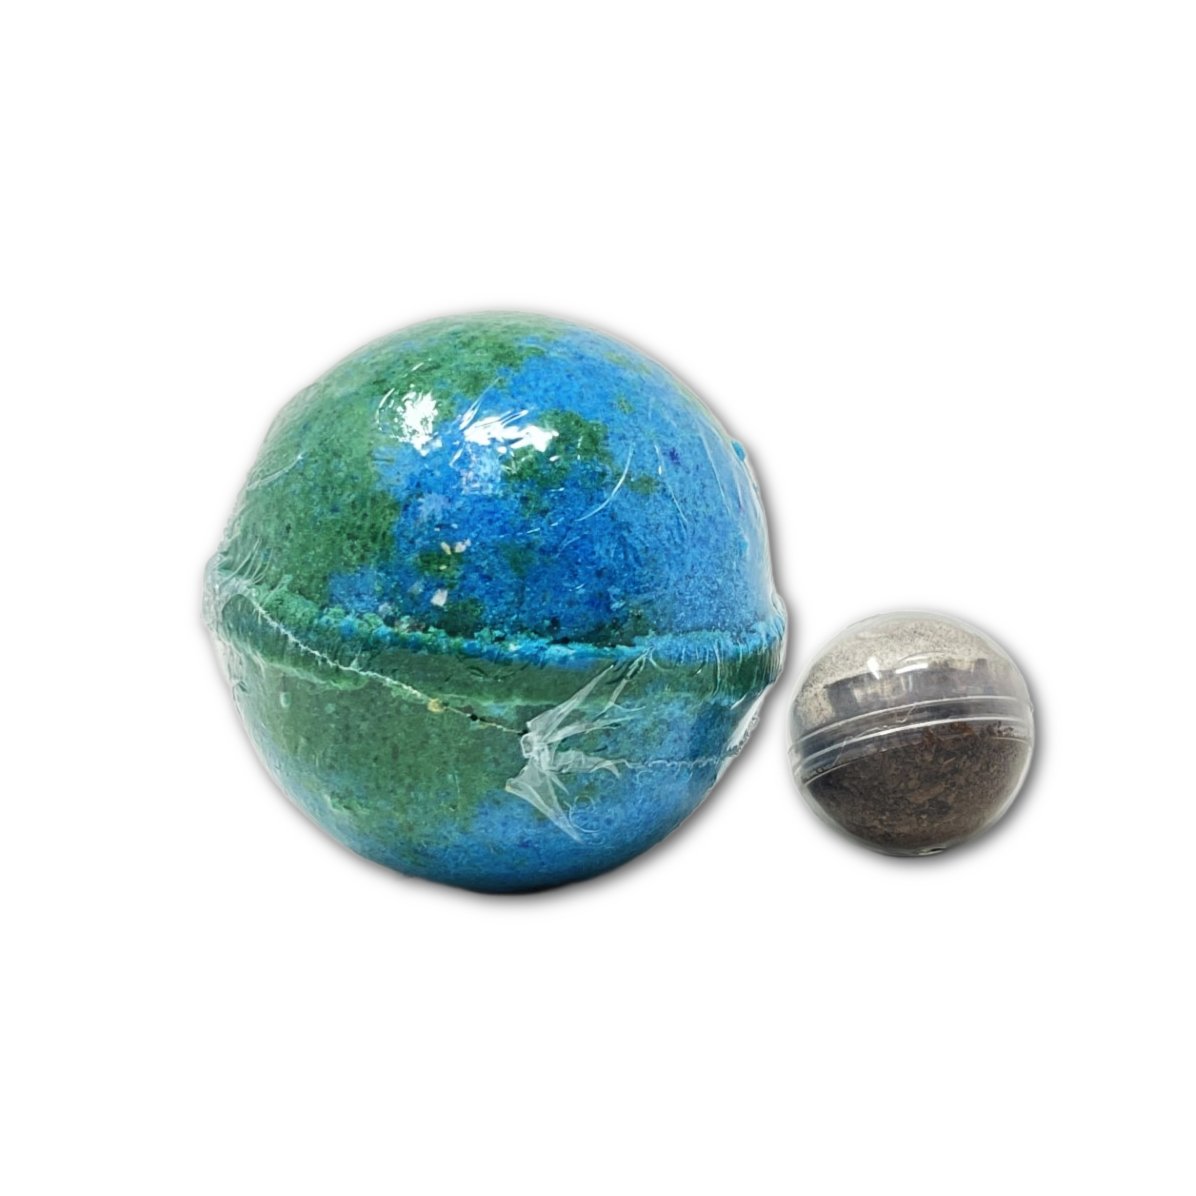 Earth Day Bath Bombs with WildFlower Seeds Inside - Oily BlendsEarth Day Bath Bombs with WildFlower Seeds Inside